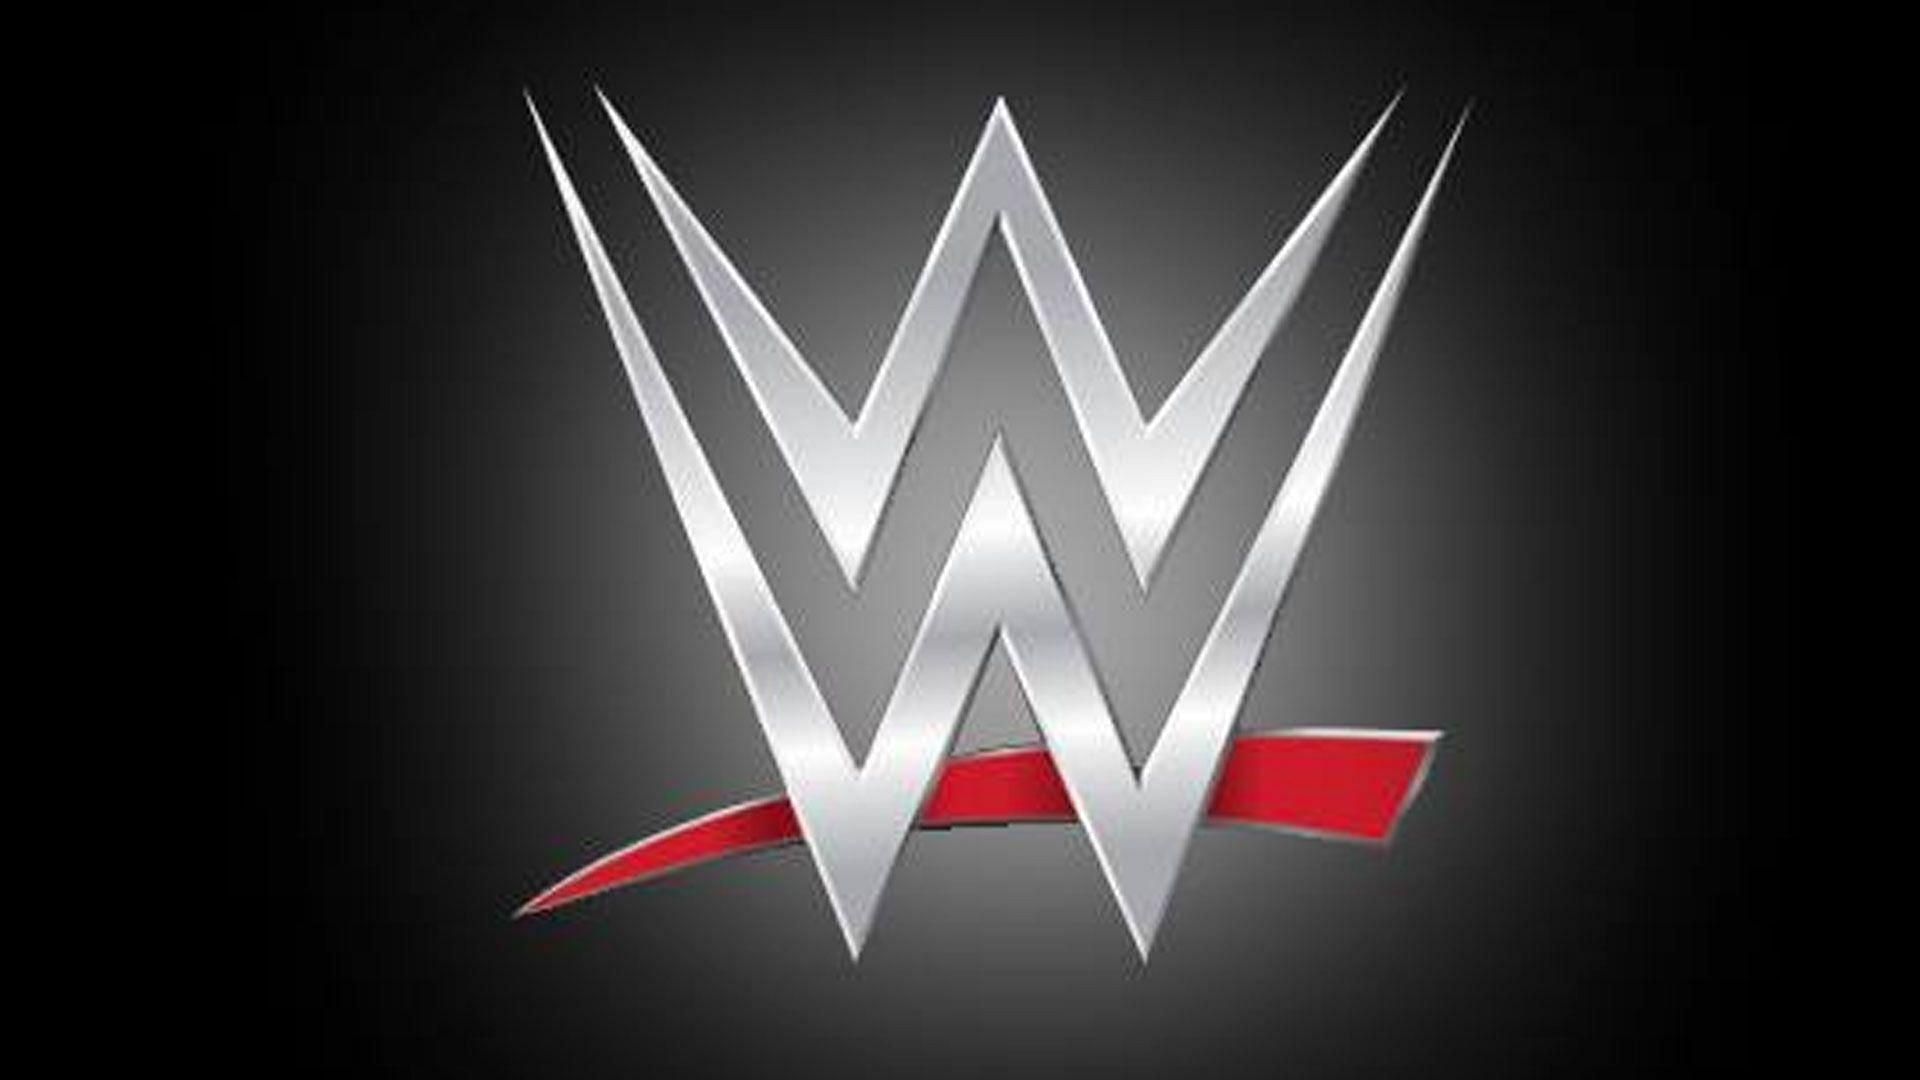 WWE RAW will debut at the UBS Arena in November